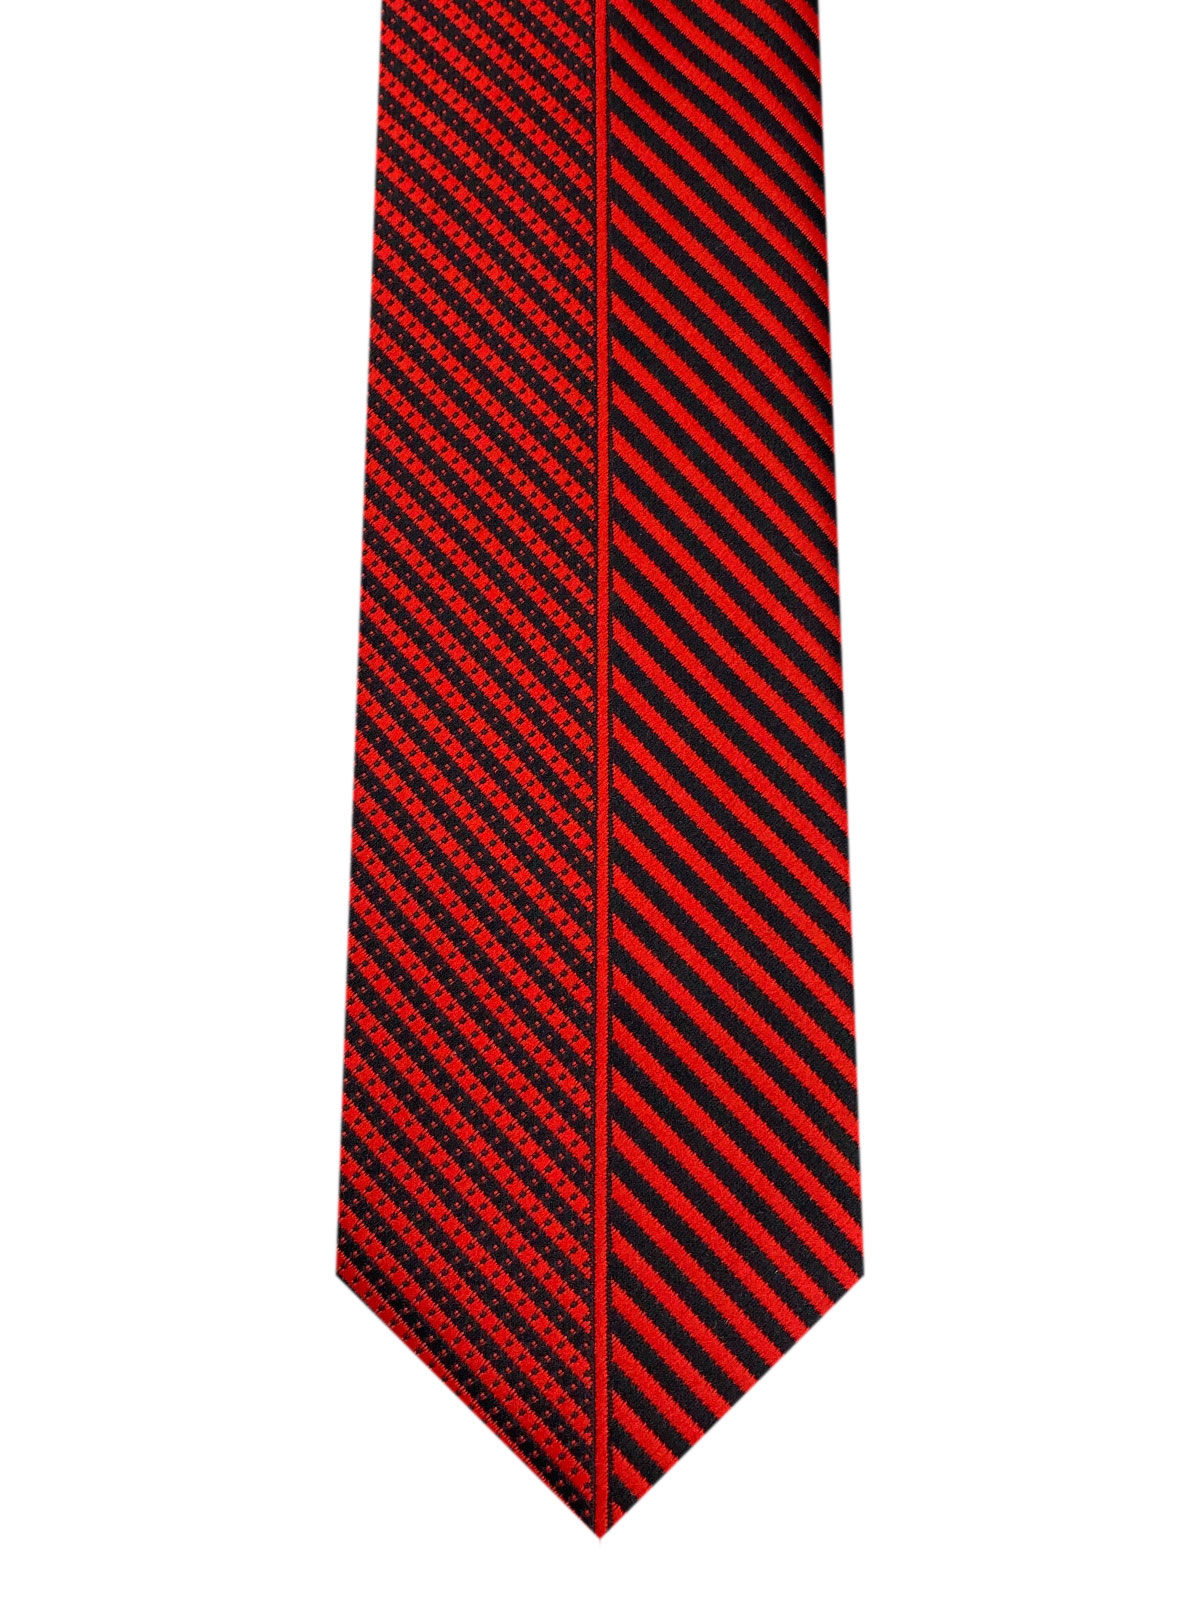 Bright red striped tie - 10206 - € 14.06 img2